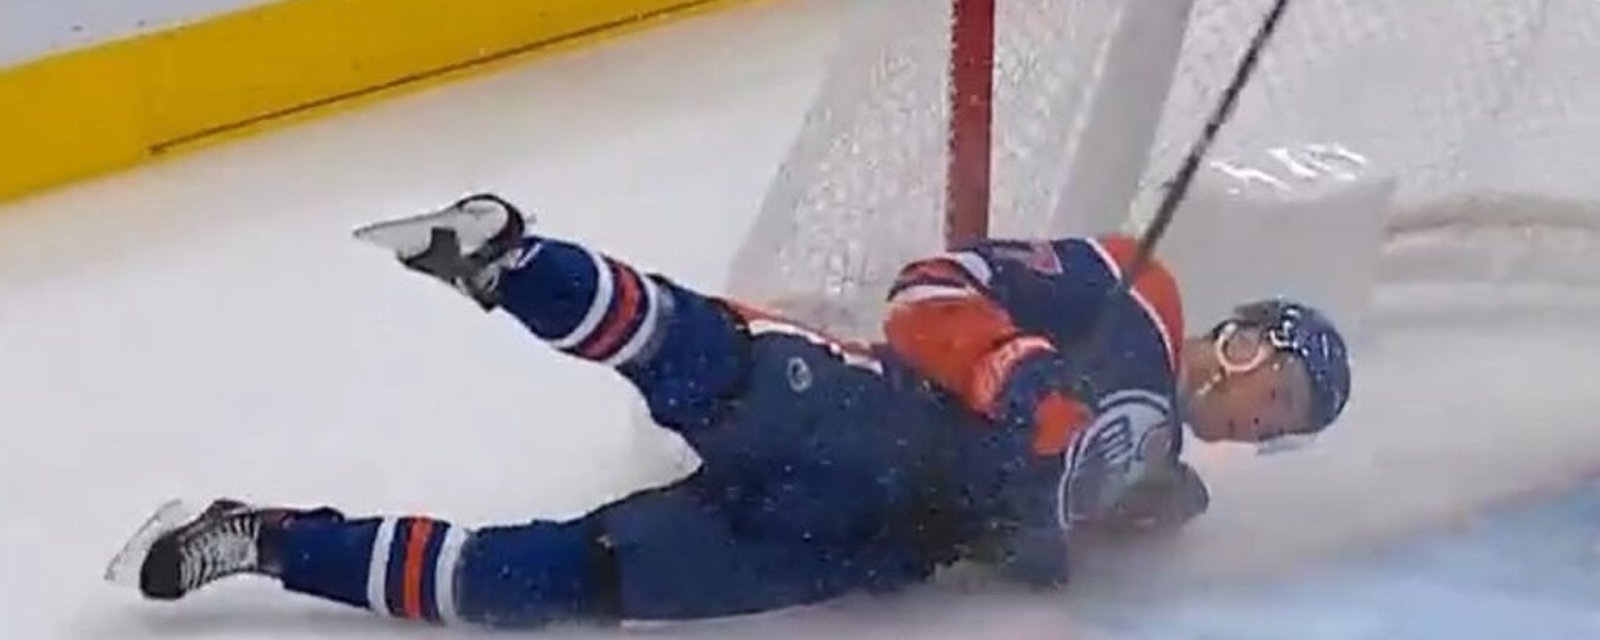 Connor McDavid gets tricked into revealing more about his injury